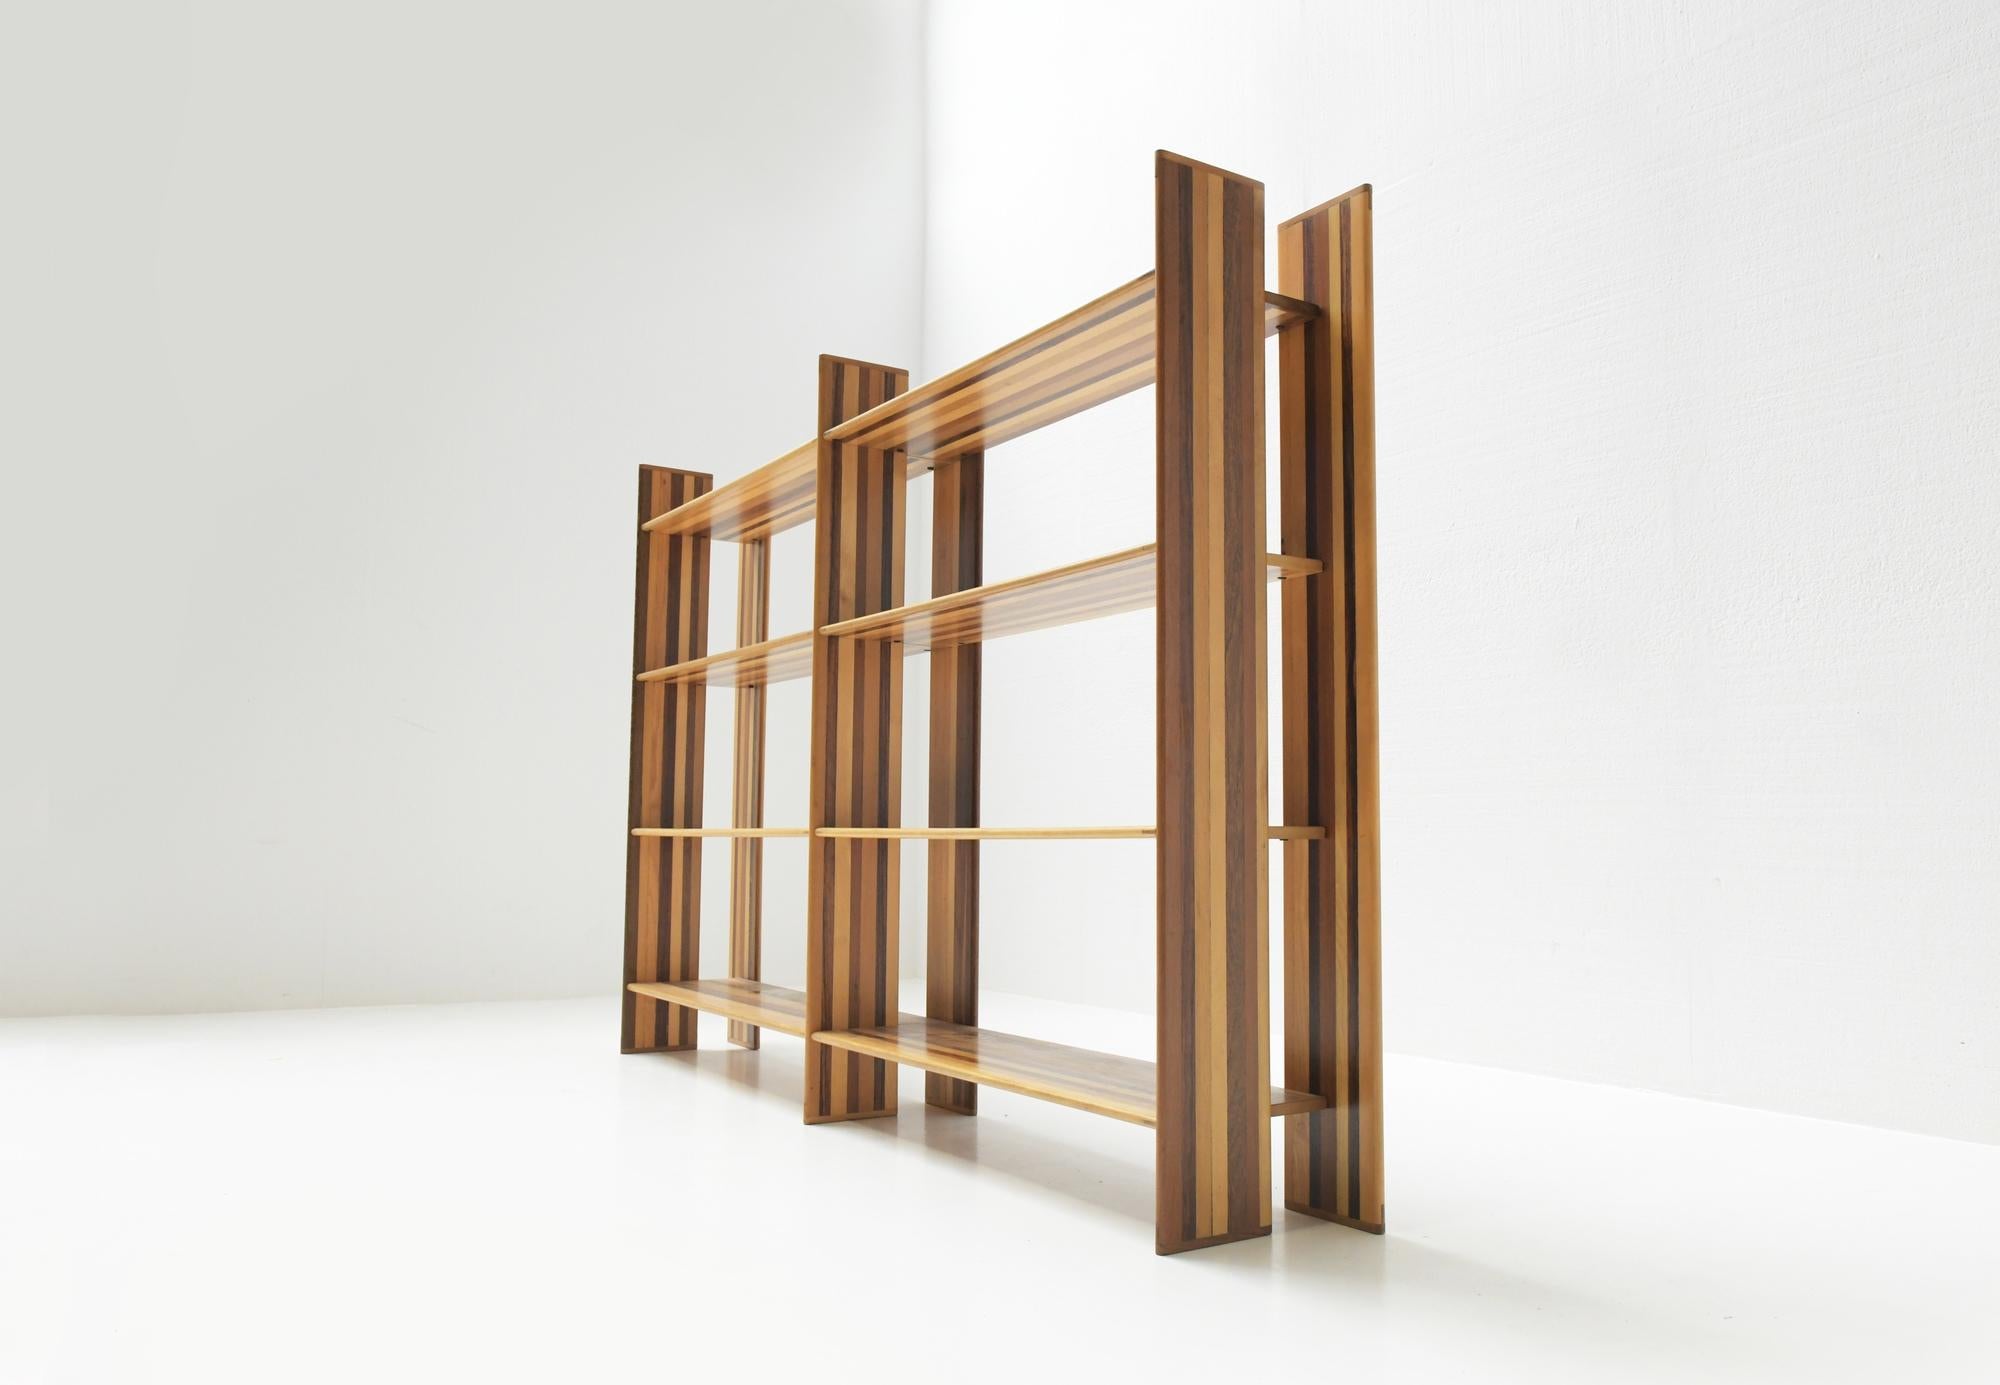 Stunning modular MOP bookcase/room divider.
Designed by Afra e Tobia Scarpa for Molteni, Italy.

Mop is the second life of an exquisite material: wood. Scraps from veneer making are used to create a new piece of furniture with two elements - a shelf